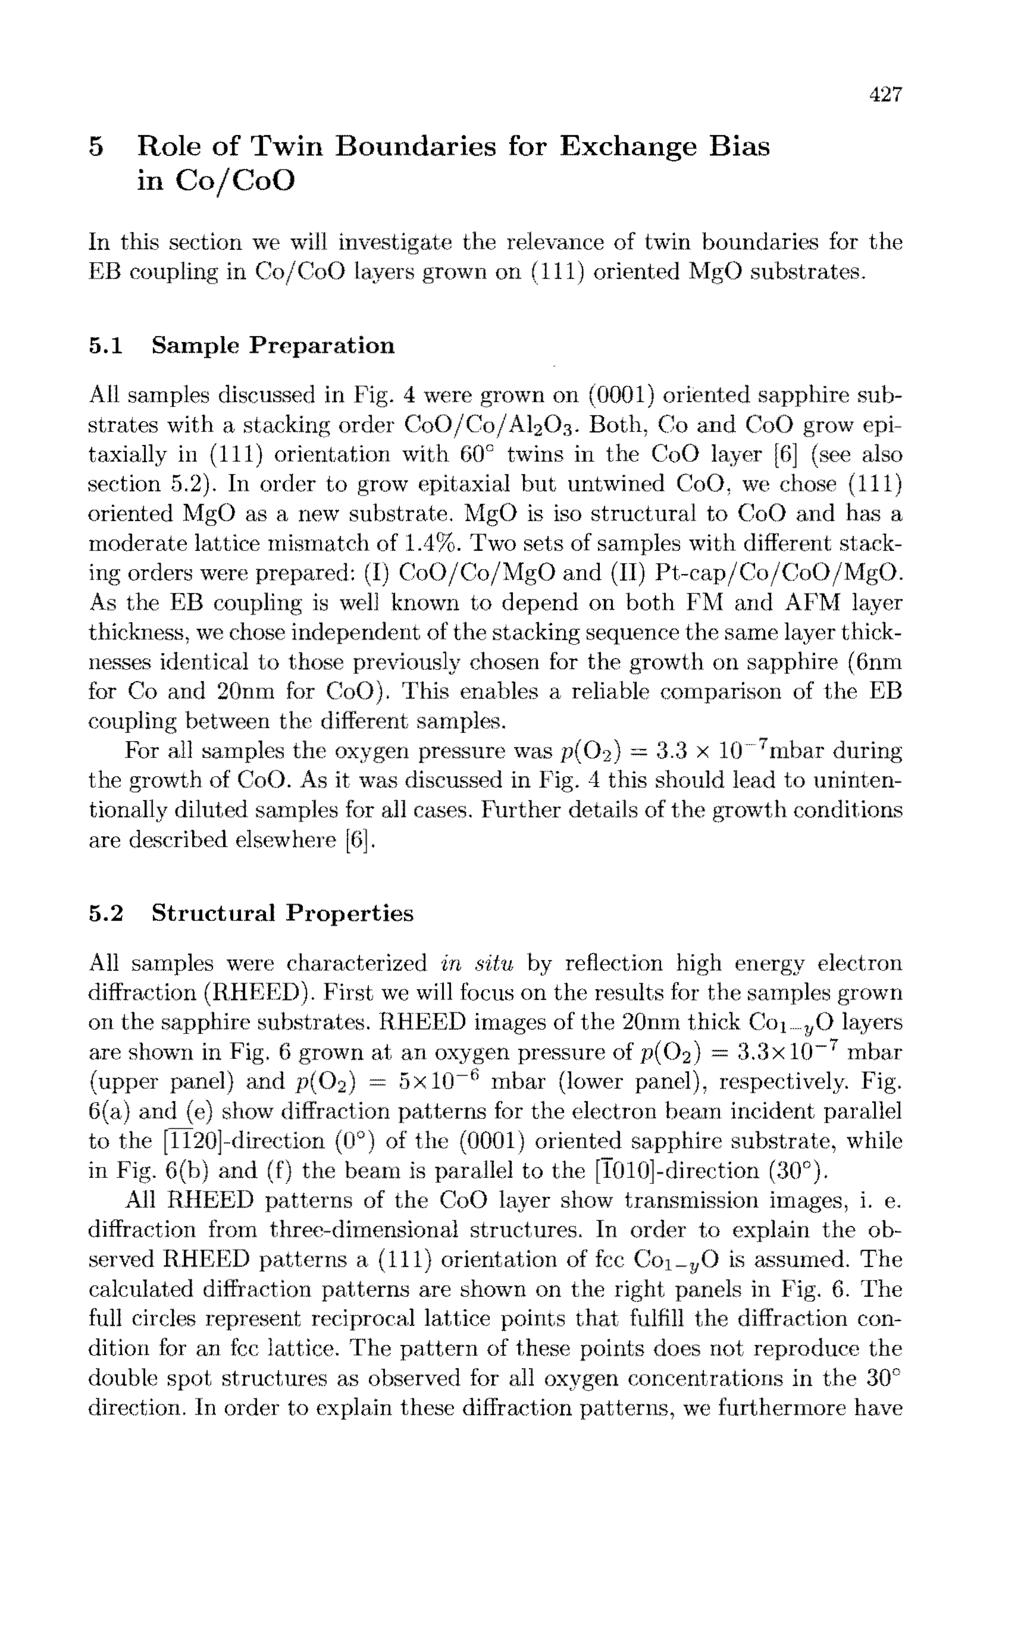 427 5 Role of Twin Boundaries for Exchange Bias in Co/CoO In this section we will EB coupling in Co/CoO the relevance of twin boundaries for the grown on (111) oriented MgO substrates. 5.1 Sample Preparation All samples discussed in 4 were grown on (0001) oriented sapphire substrates with a stacking order CoO/Co/Ah03.